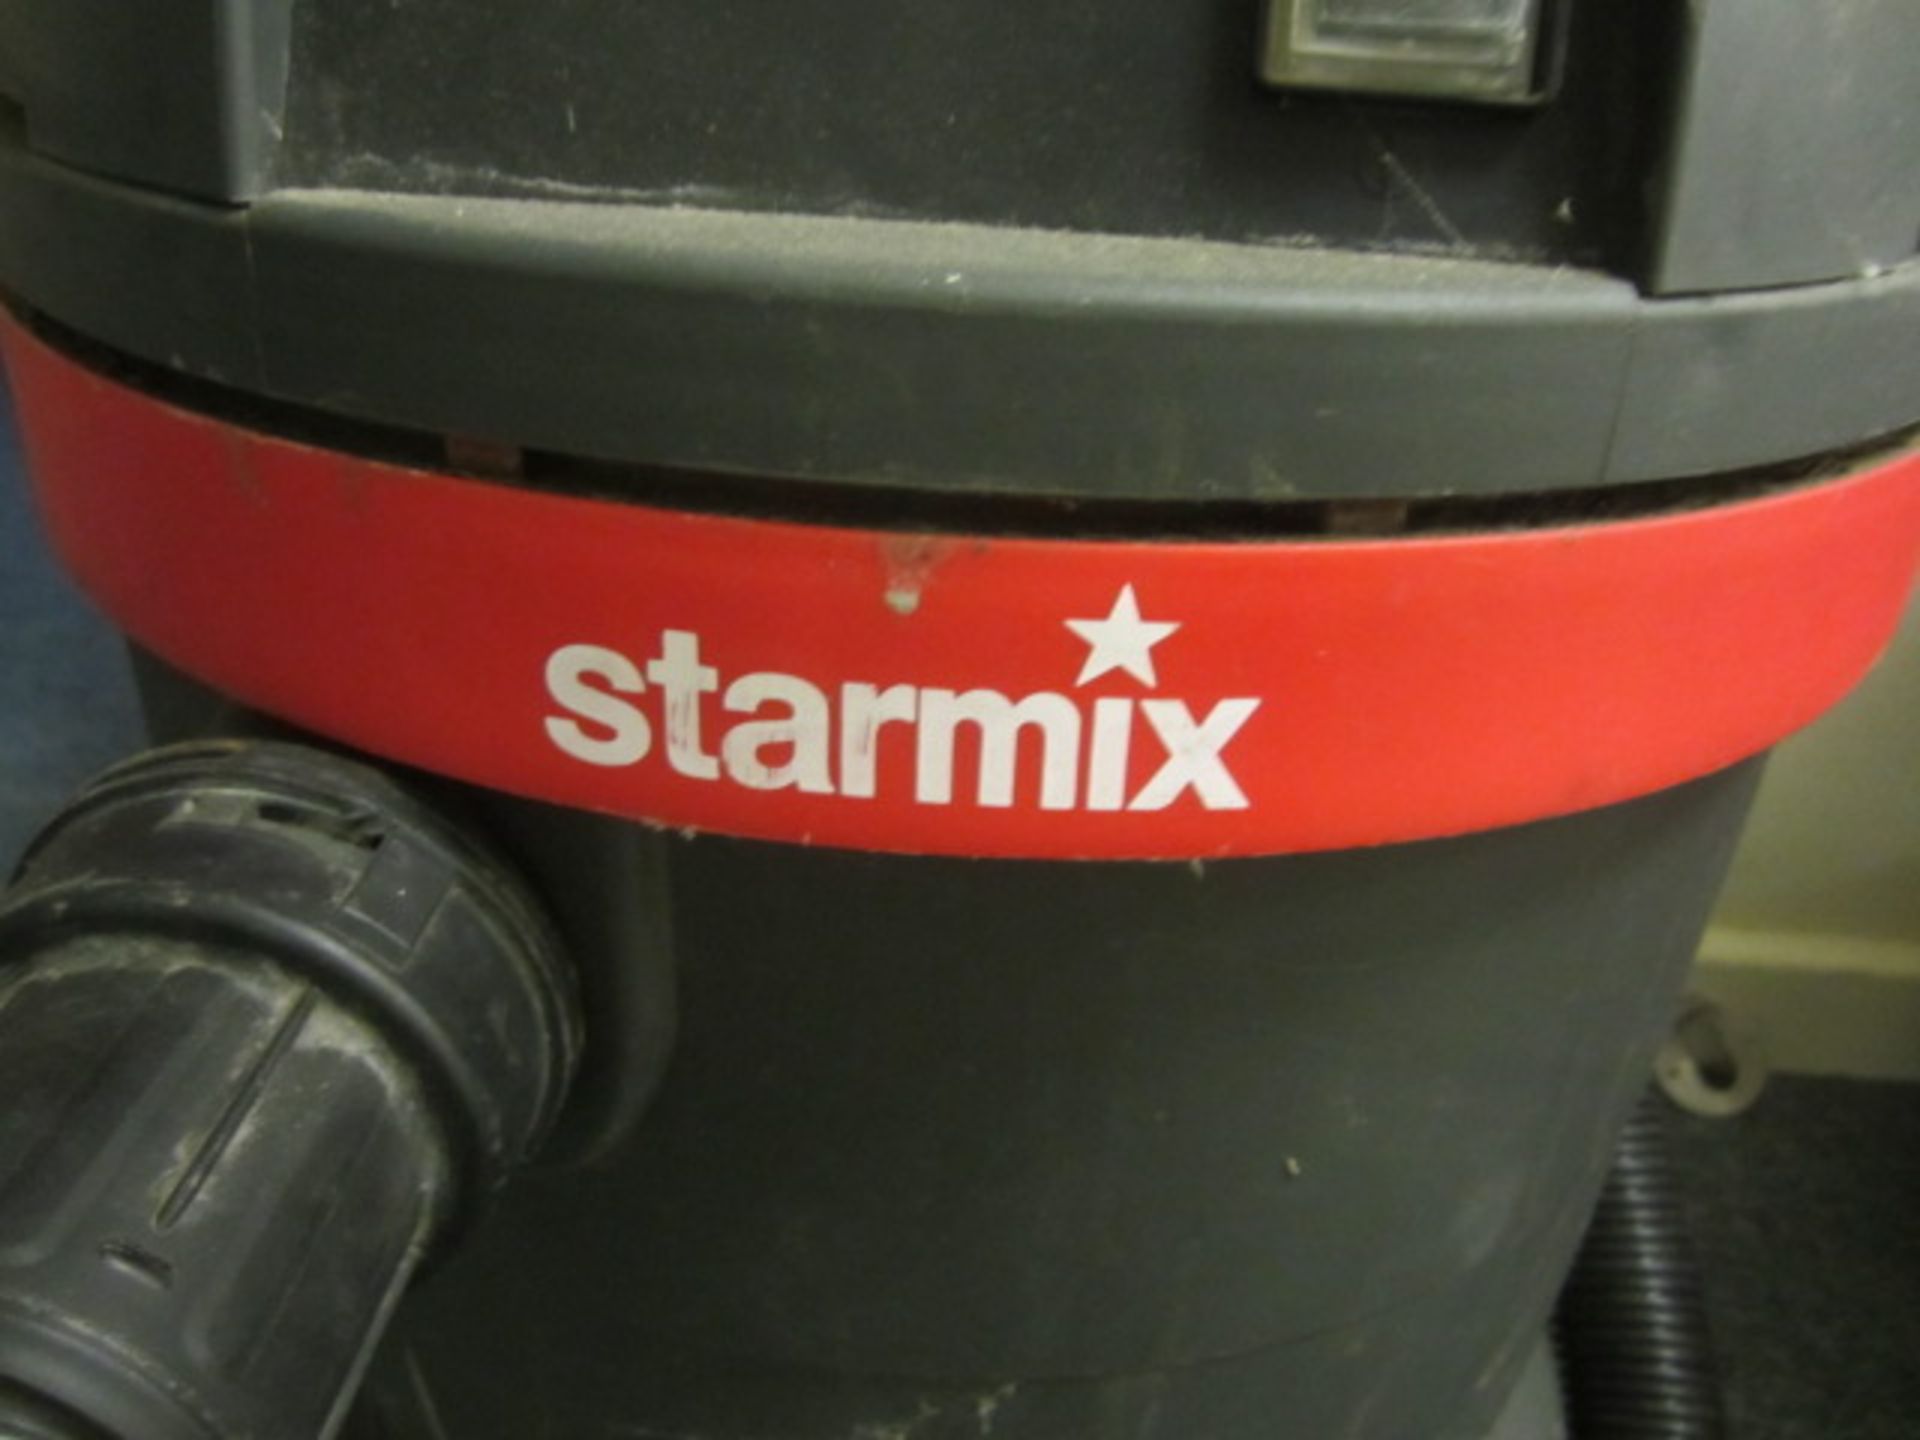 Starmix Electro Star type GS industrial vacuum, model 1032HK/002613, 110v - Image 2 of 4